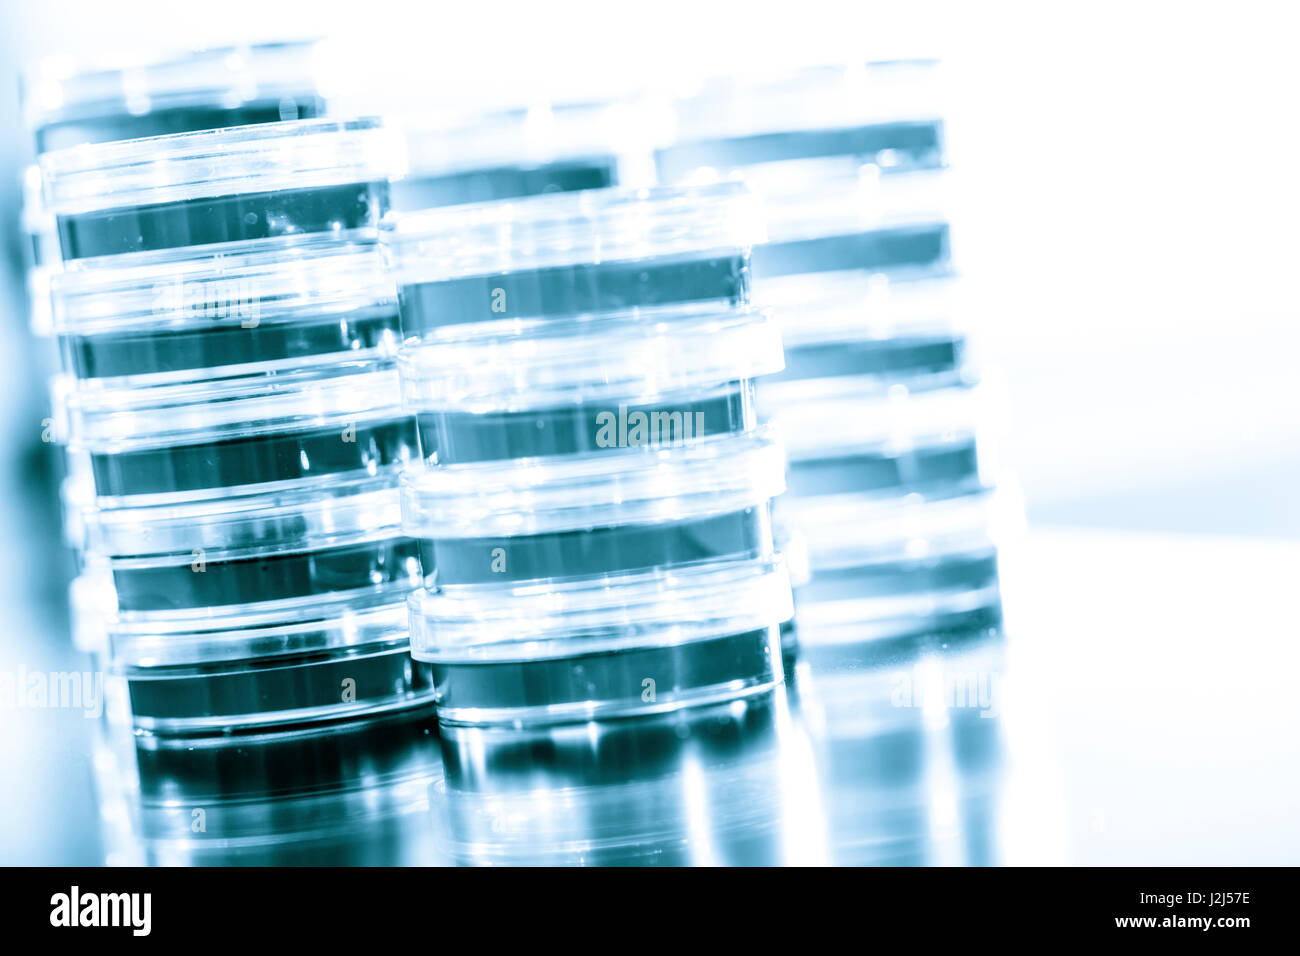 Petri dishes stacked up. Stock Photo